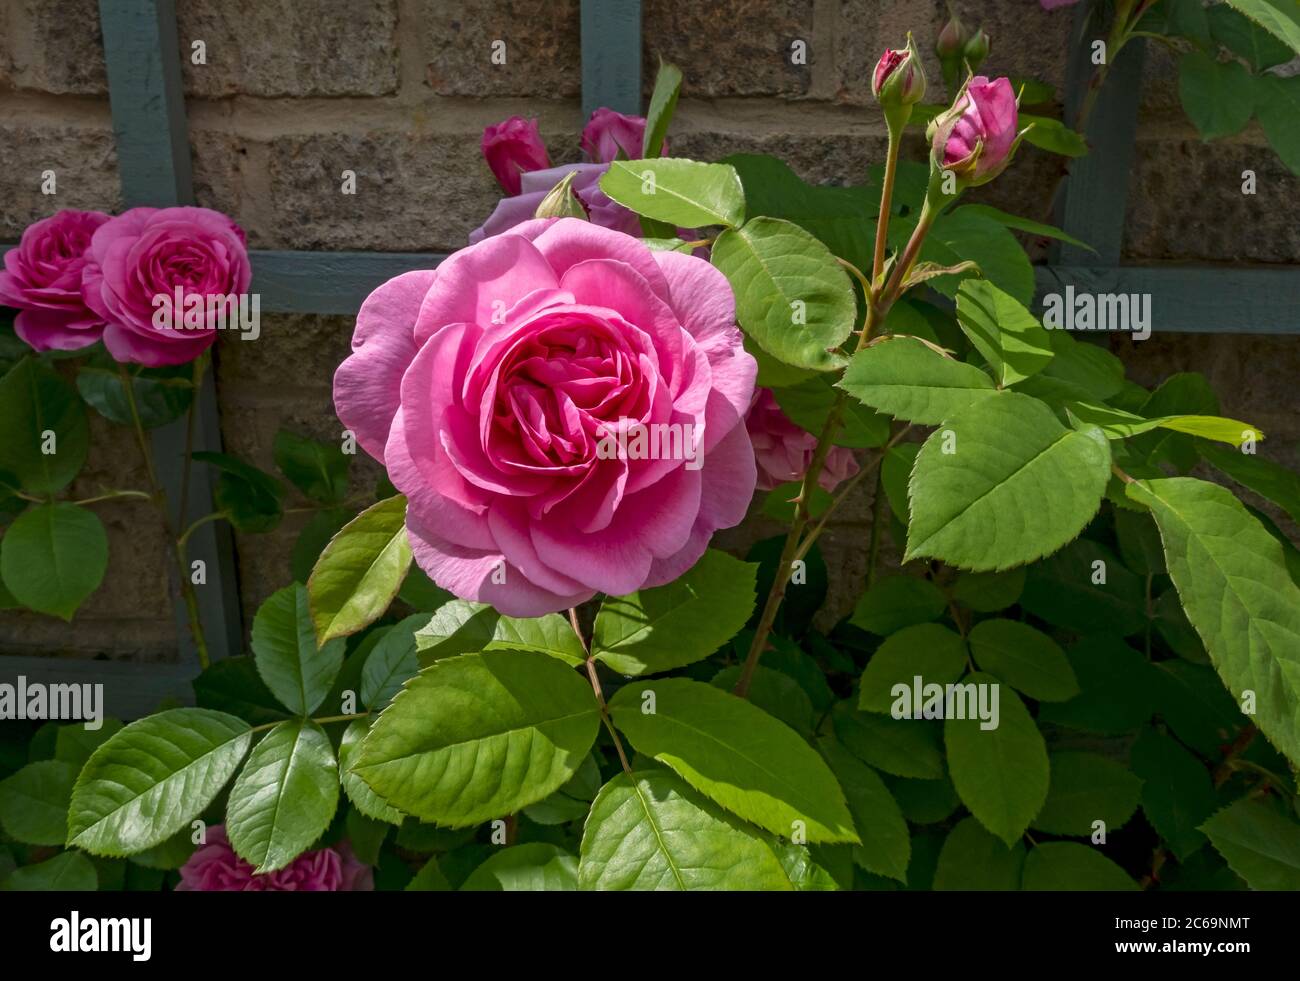 Close up of pink roses climbing rose 'Gertrude Jekyll' growing on trellis  on a wall flowers flower buds in the garden in summer England UK GB Britain  Stock Photo - Alamy